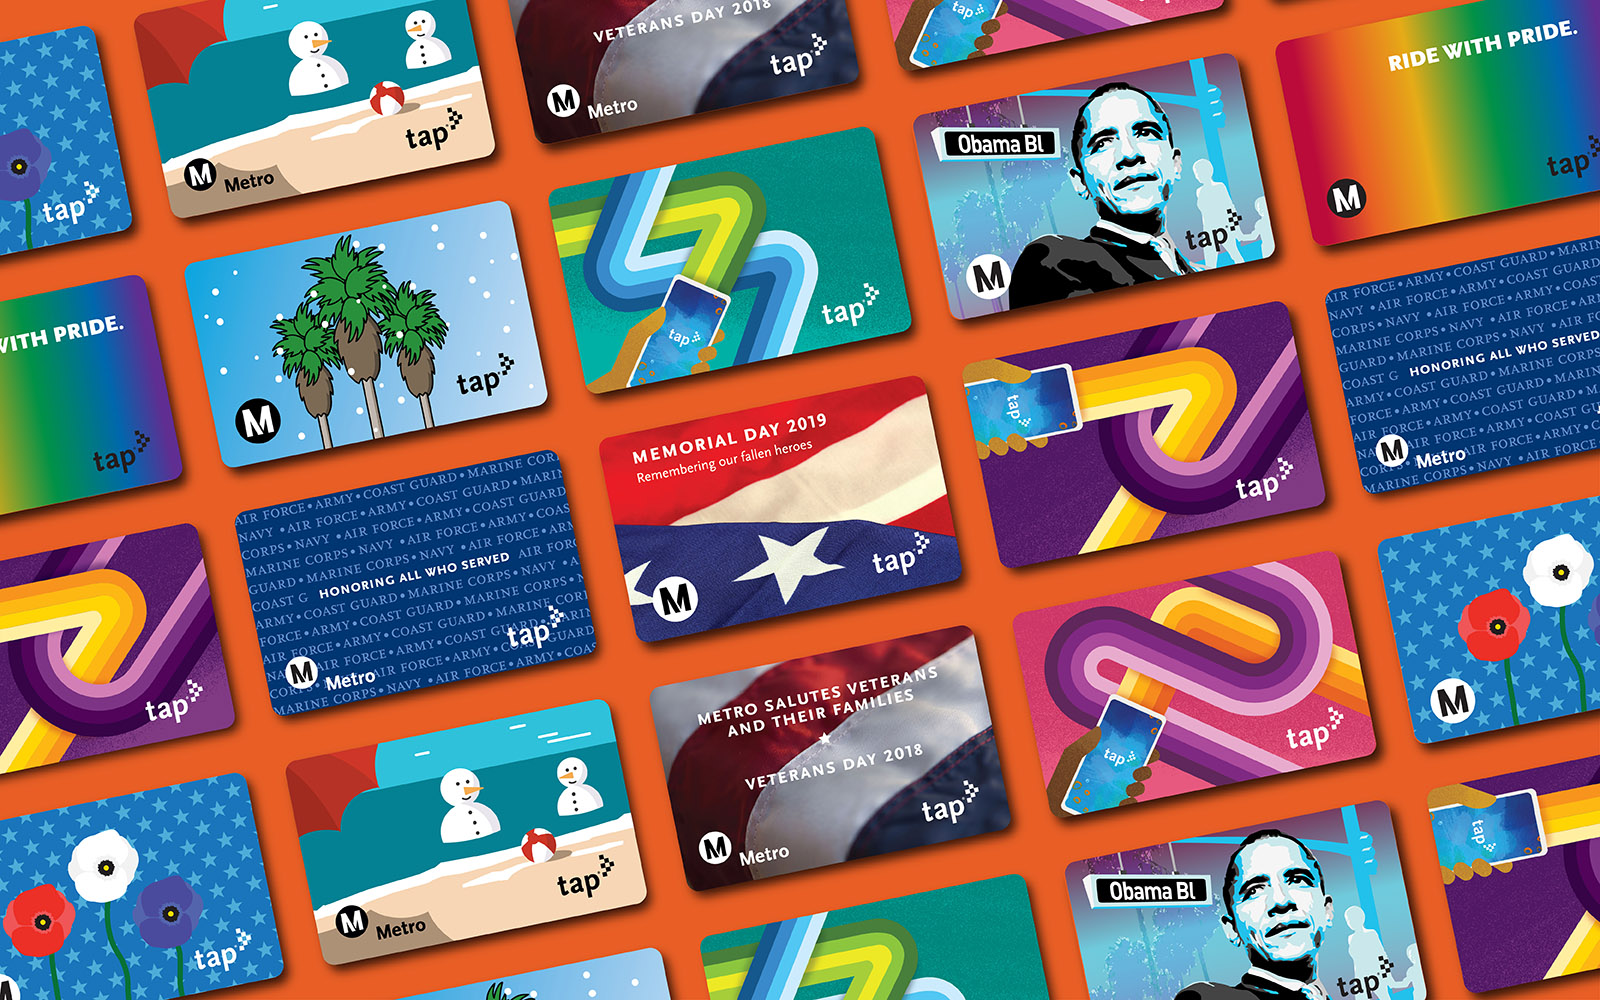 A variety of colorful commemorative Metro TAP Cards are arranged in a diagonal repeating pattern against an orange background.